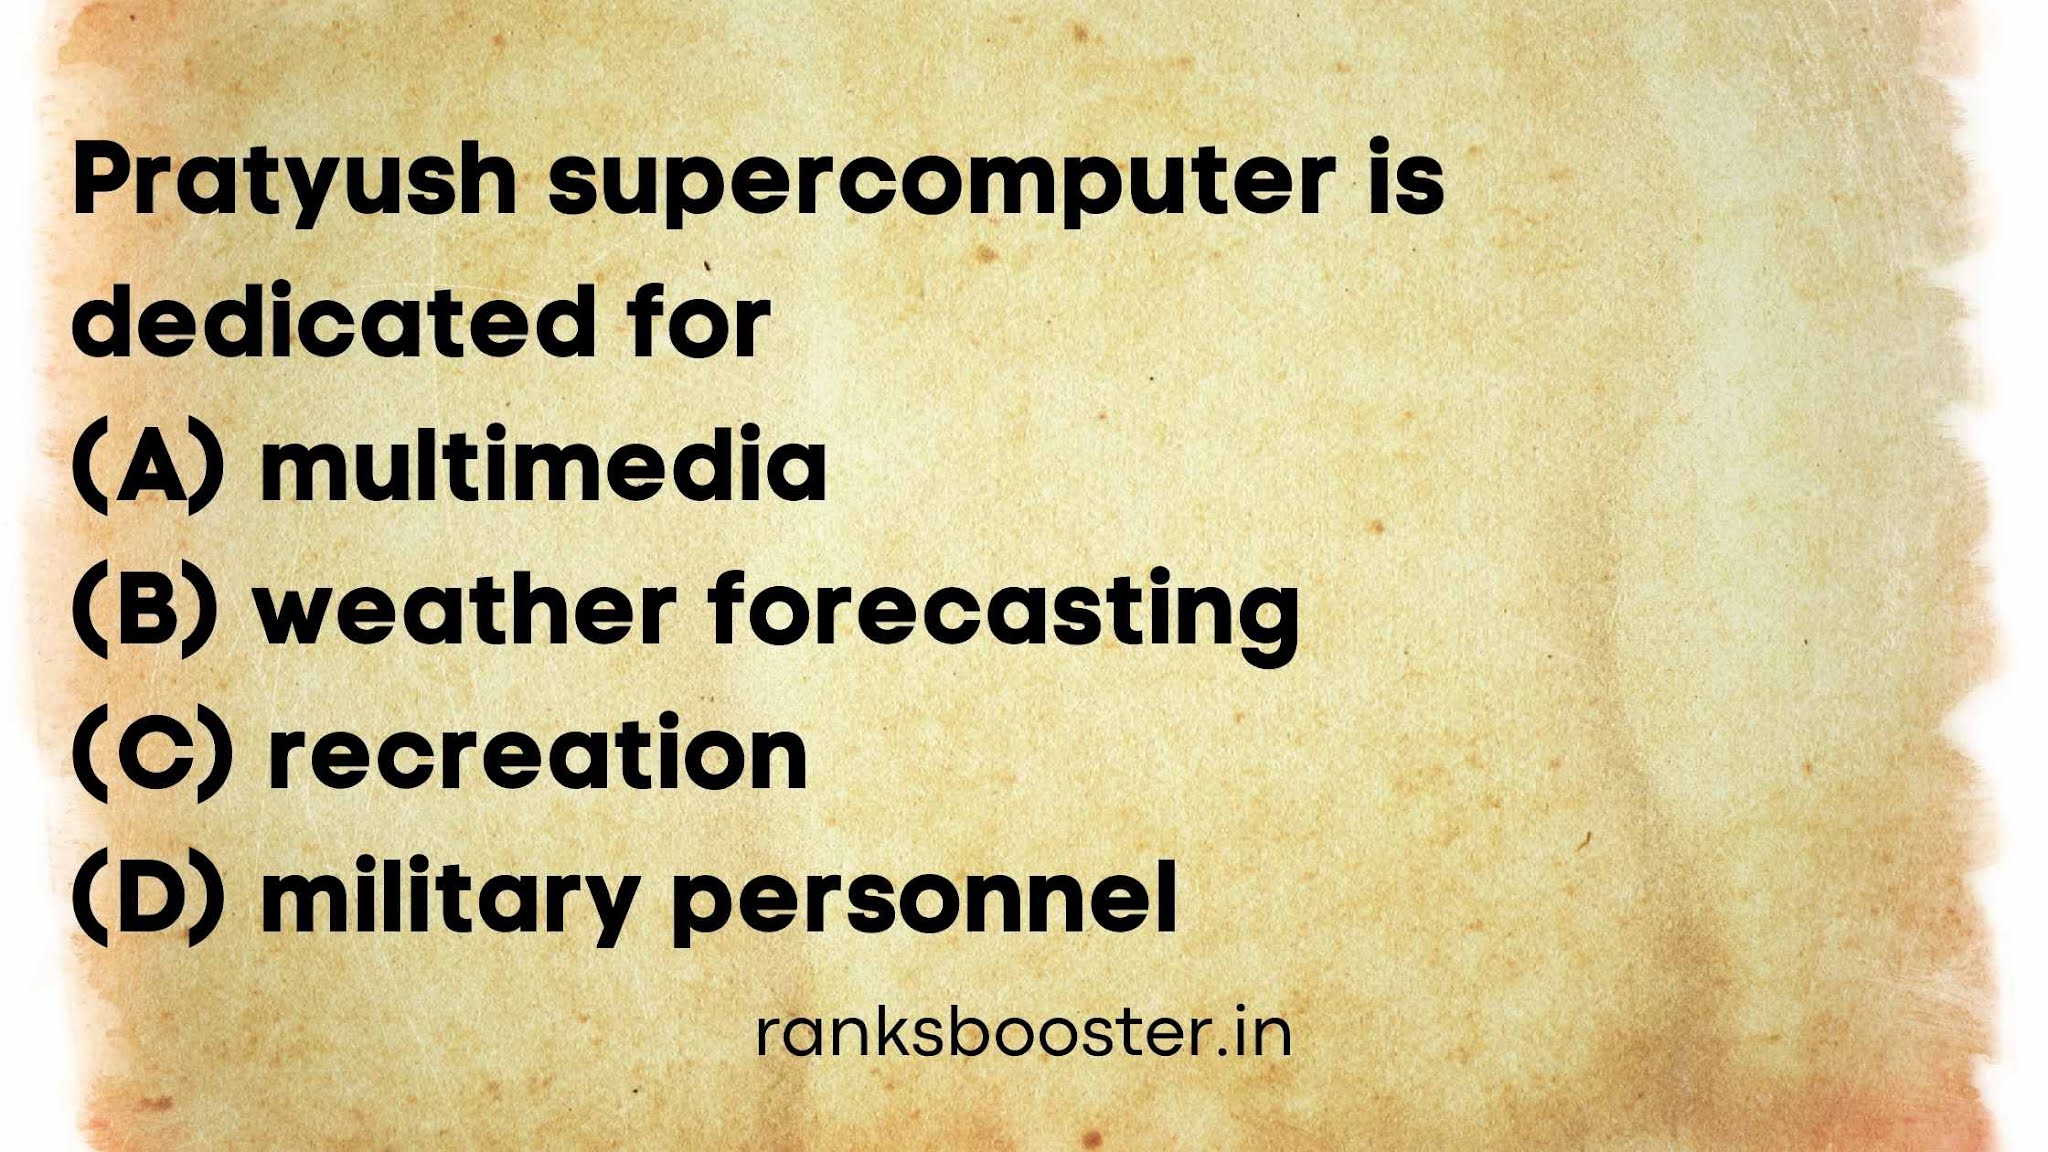 Pratyush supercomputer is dedicated for (A) multimedia (B) weather forecasting (C) recreation (D) military personnel